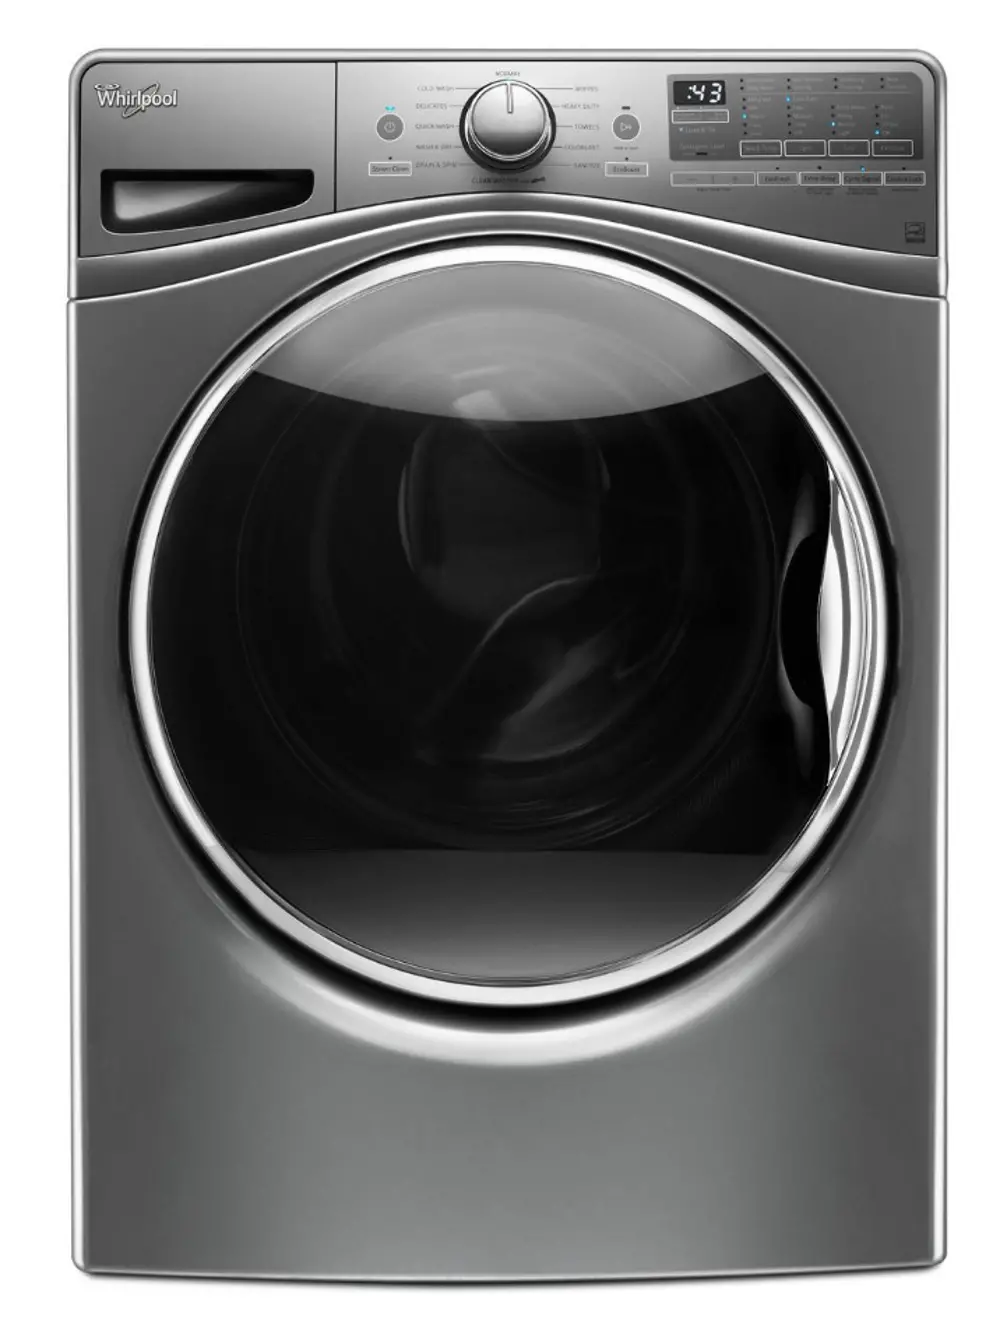 WFW92HEFC Whirlpool Front Load Washer With Load and Go System - 4.5 cu. ft. Chrome Shadow-1